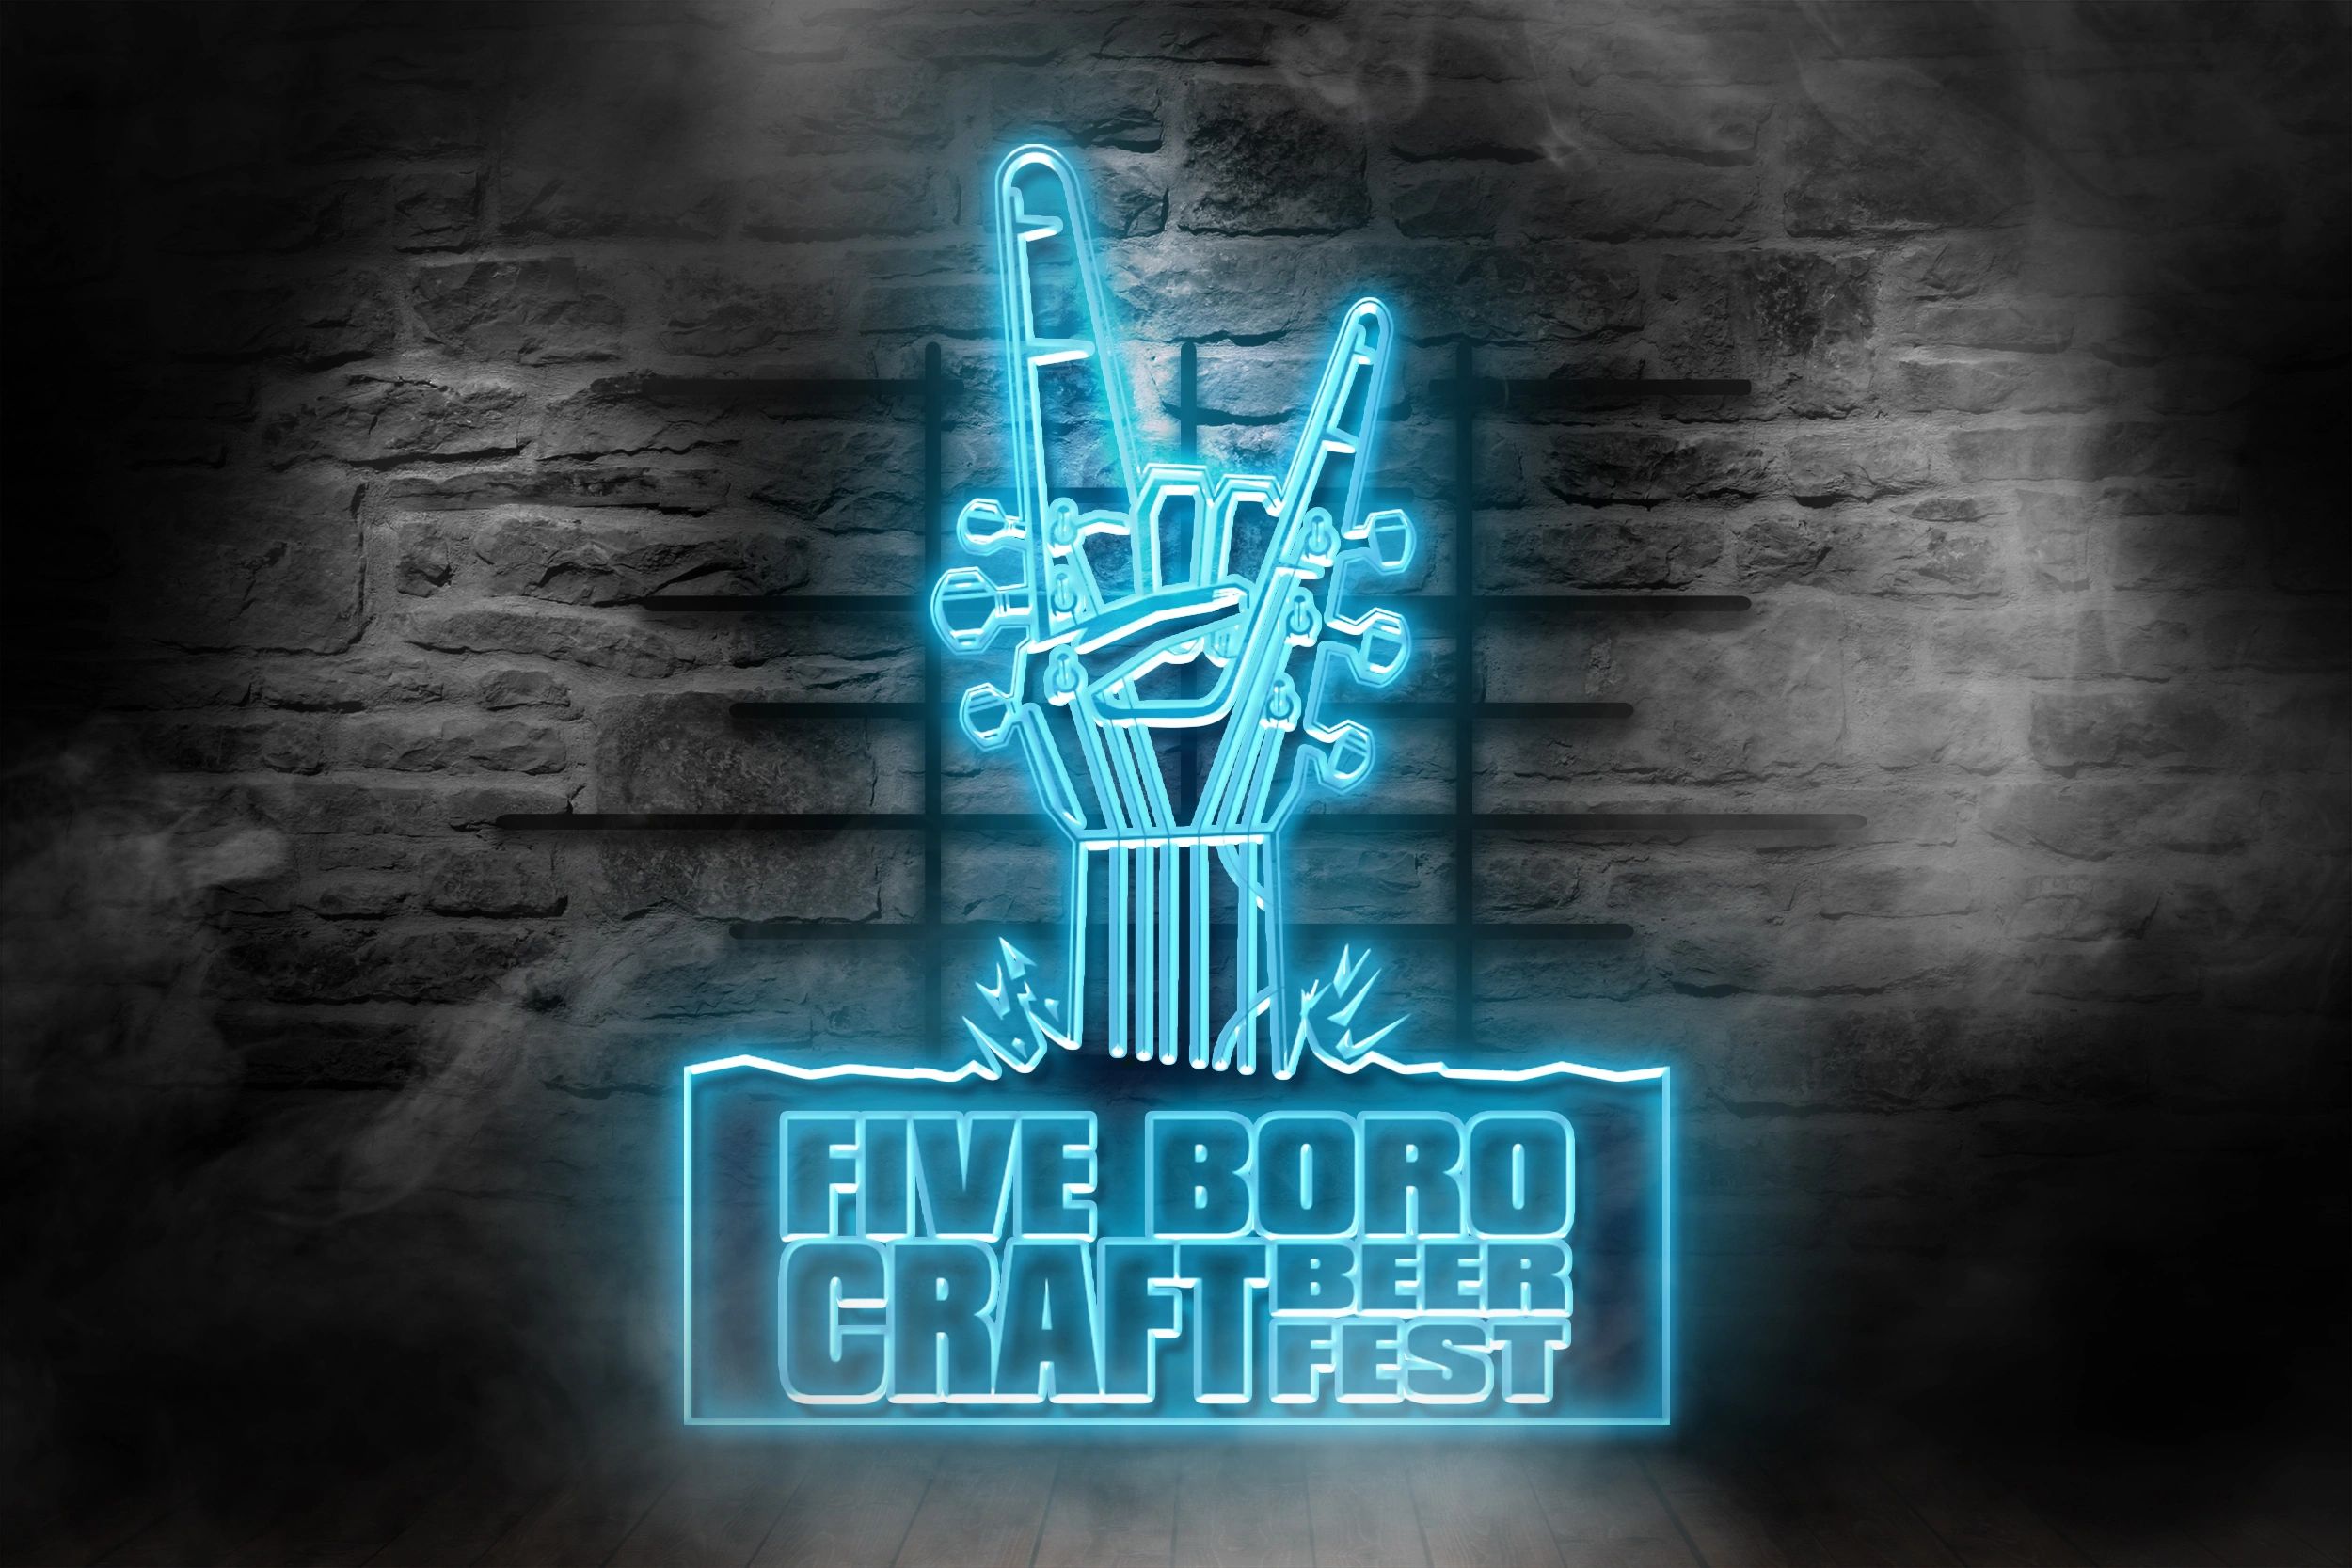 Five Boro Craft Beer Event Poster
55 Breweries, Jam Bands and Food!